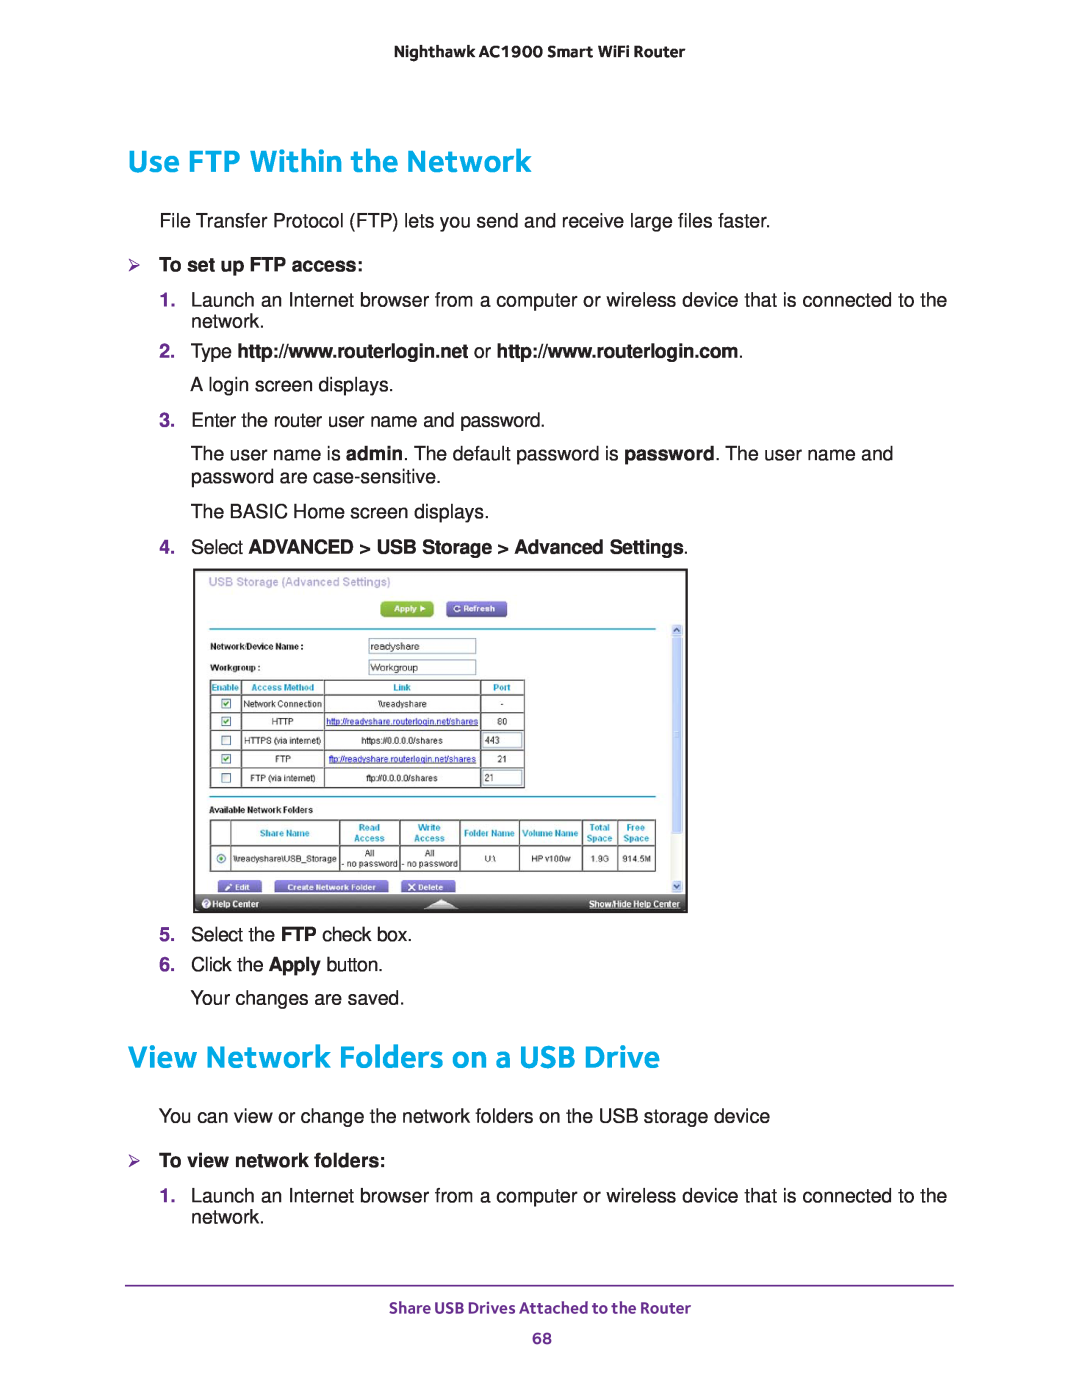 NETGEAR Model R7000 user manual Use FTP Within the Network, View Network Folders on a USB Drive,  To set up FTP access 